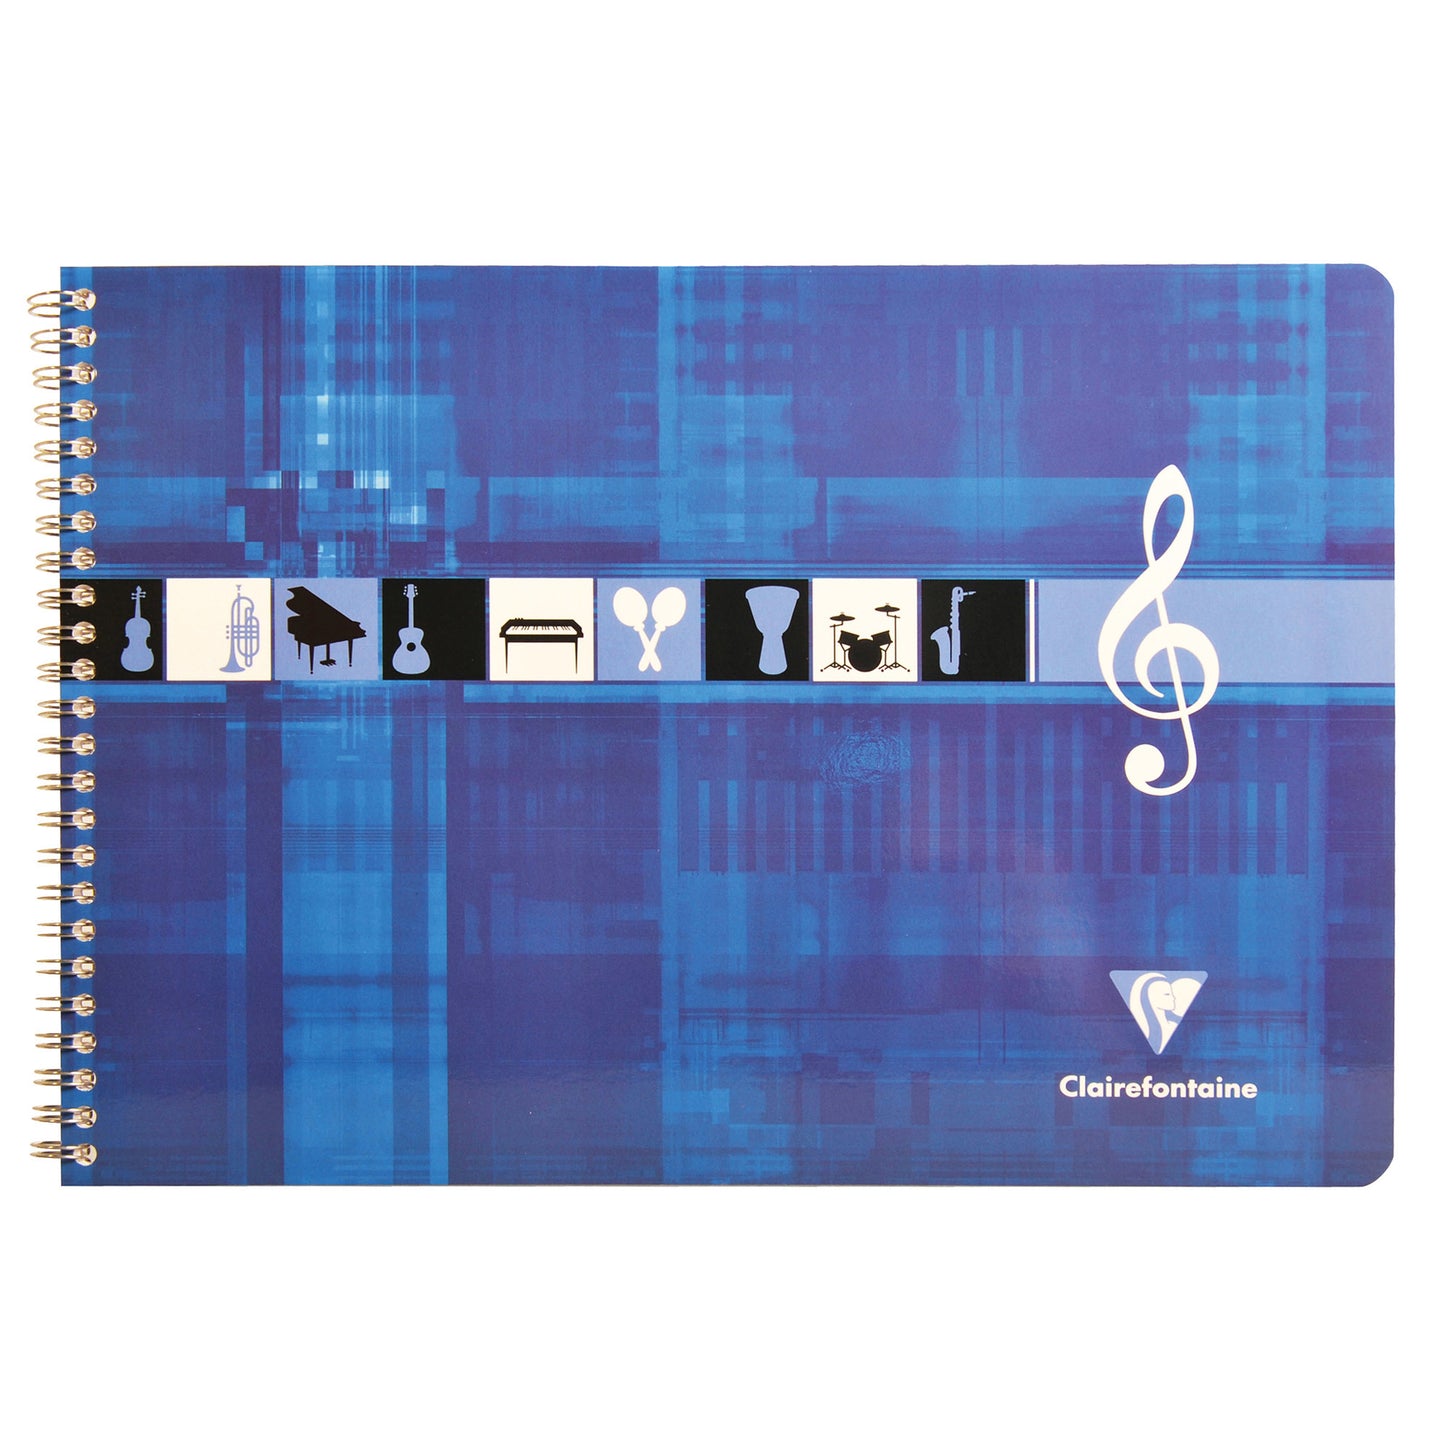 Clairefontaine #8104 Classic Music Notebook - 8 Staves per Page (11.75 x 8.25) (Assorted)